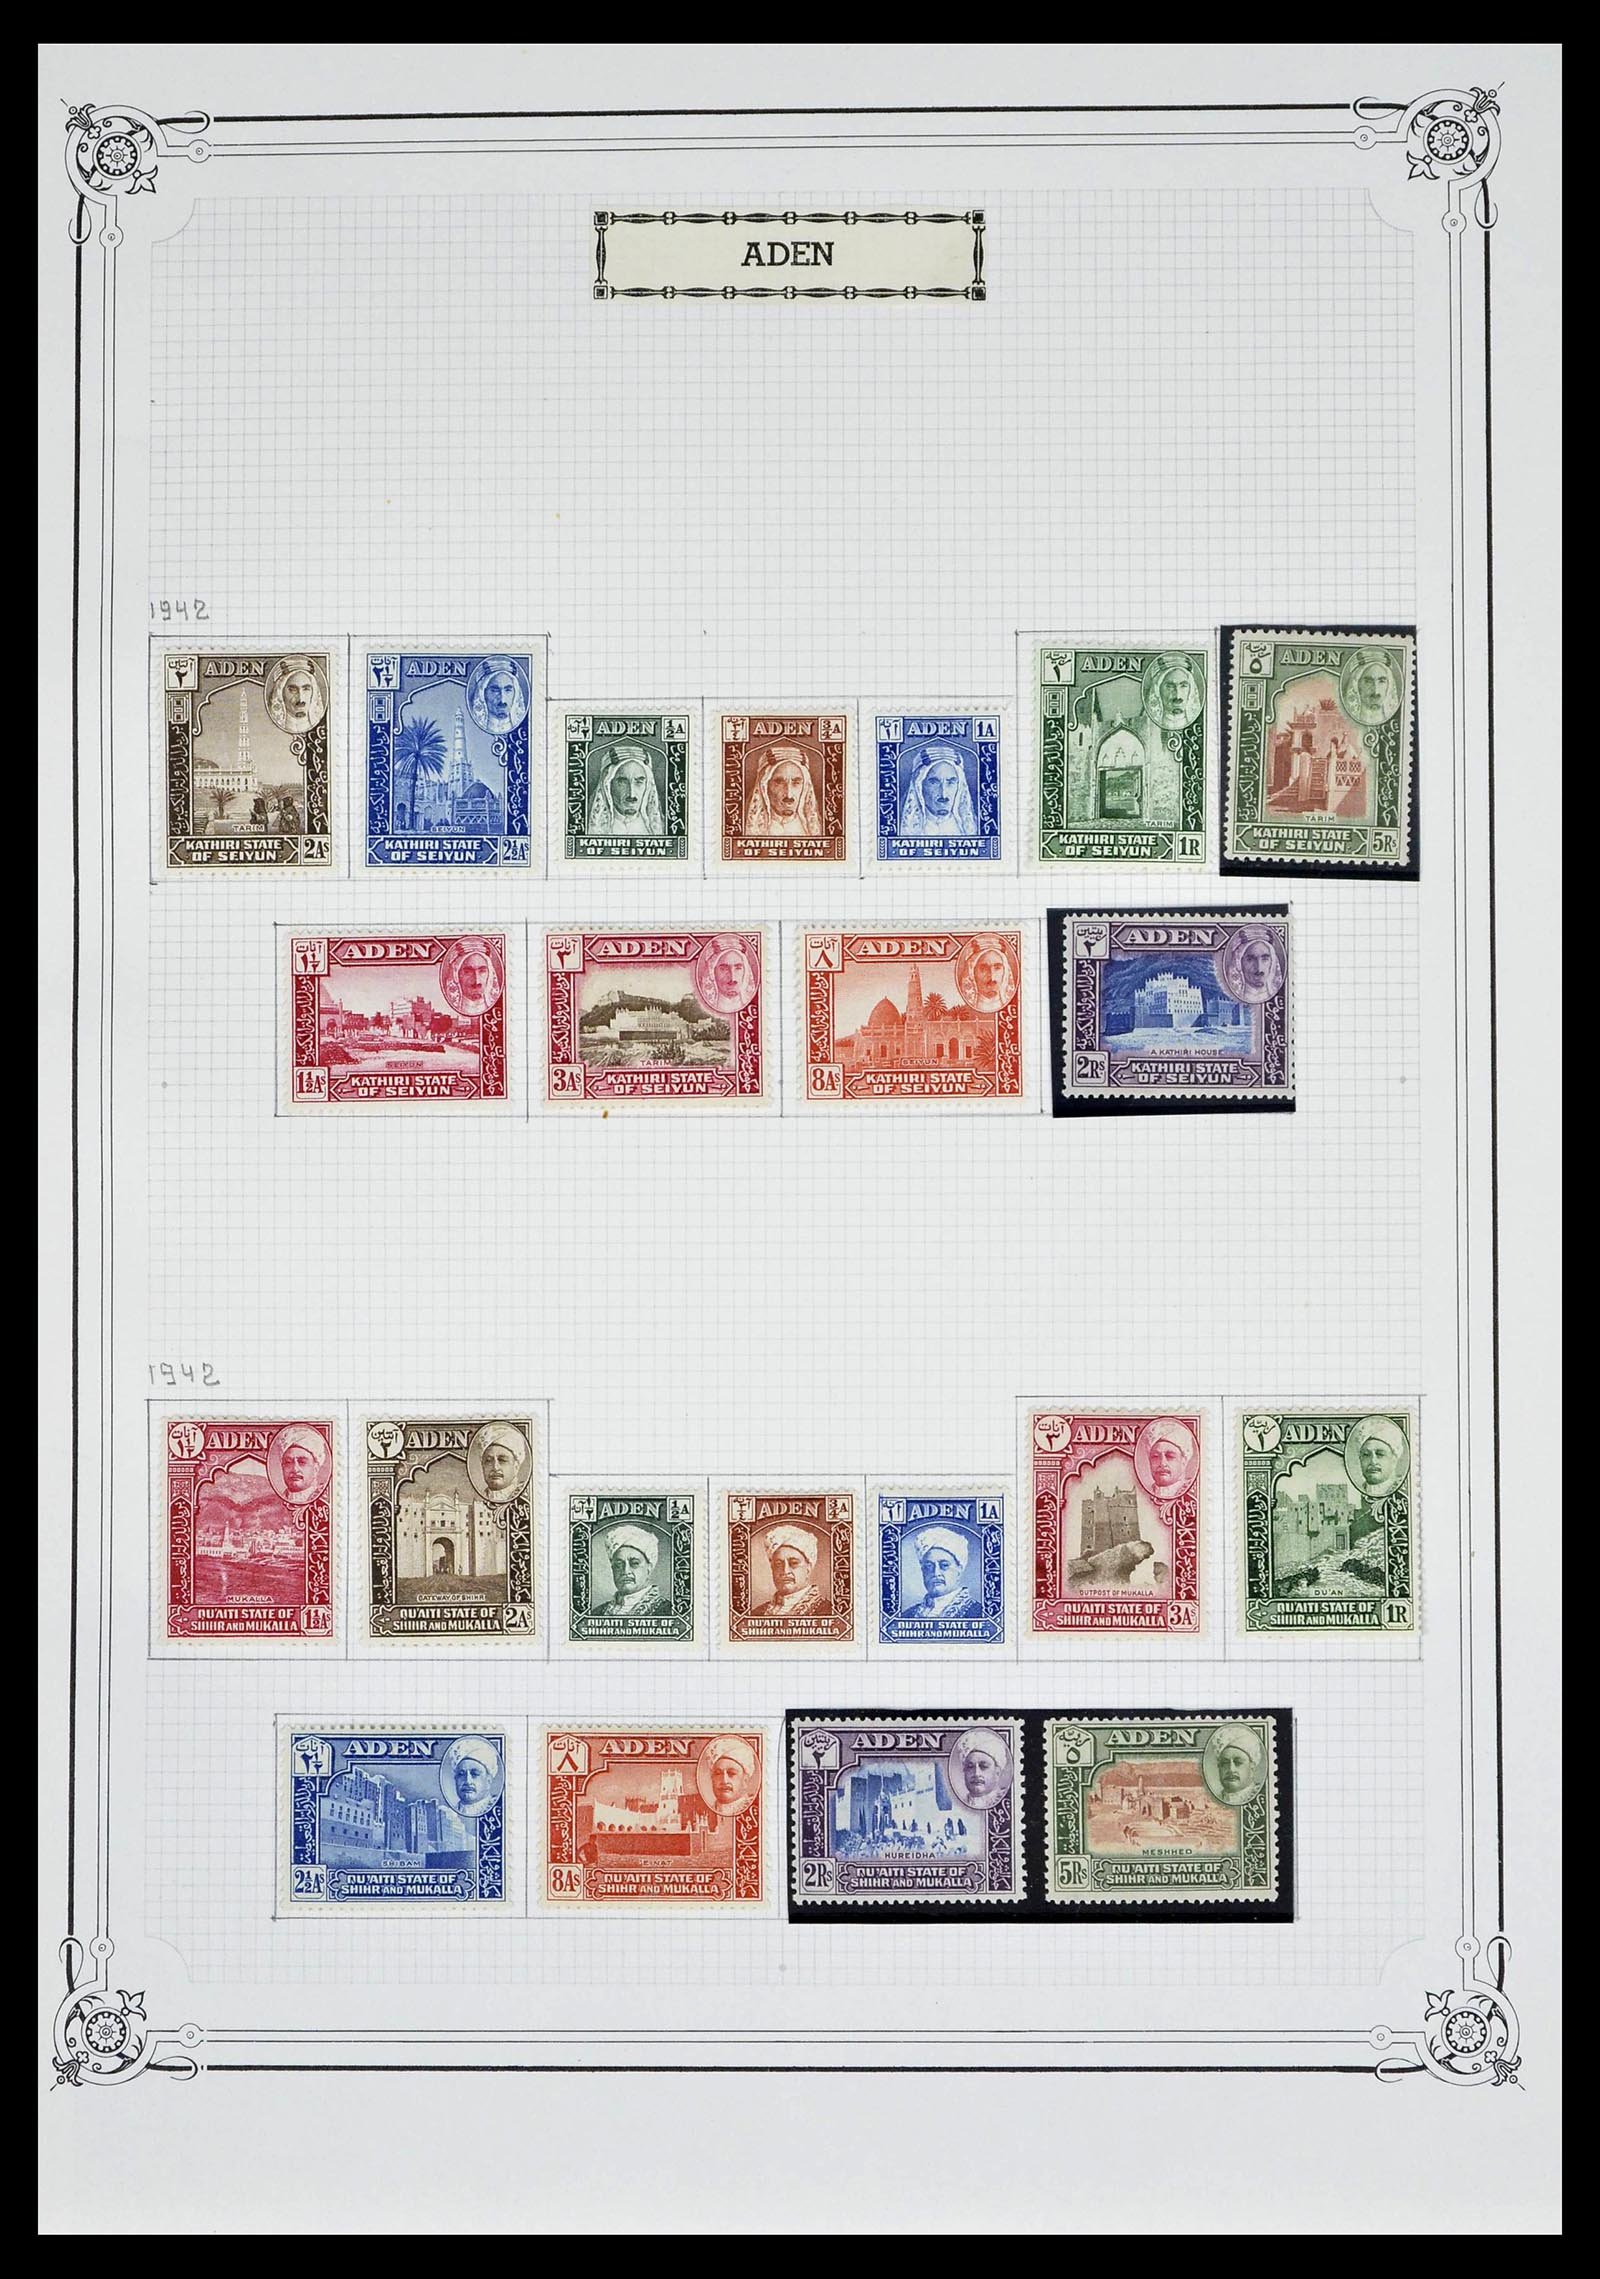 39288 0002 - Stamp collection 39288 Aden 1937-1942.